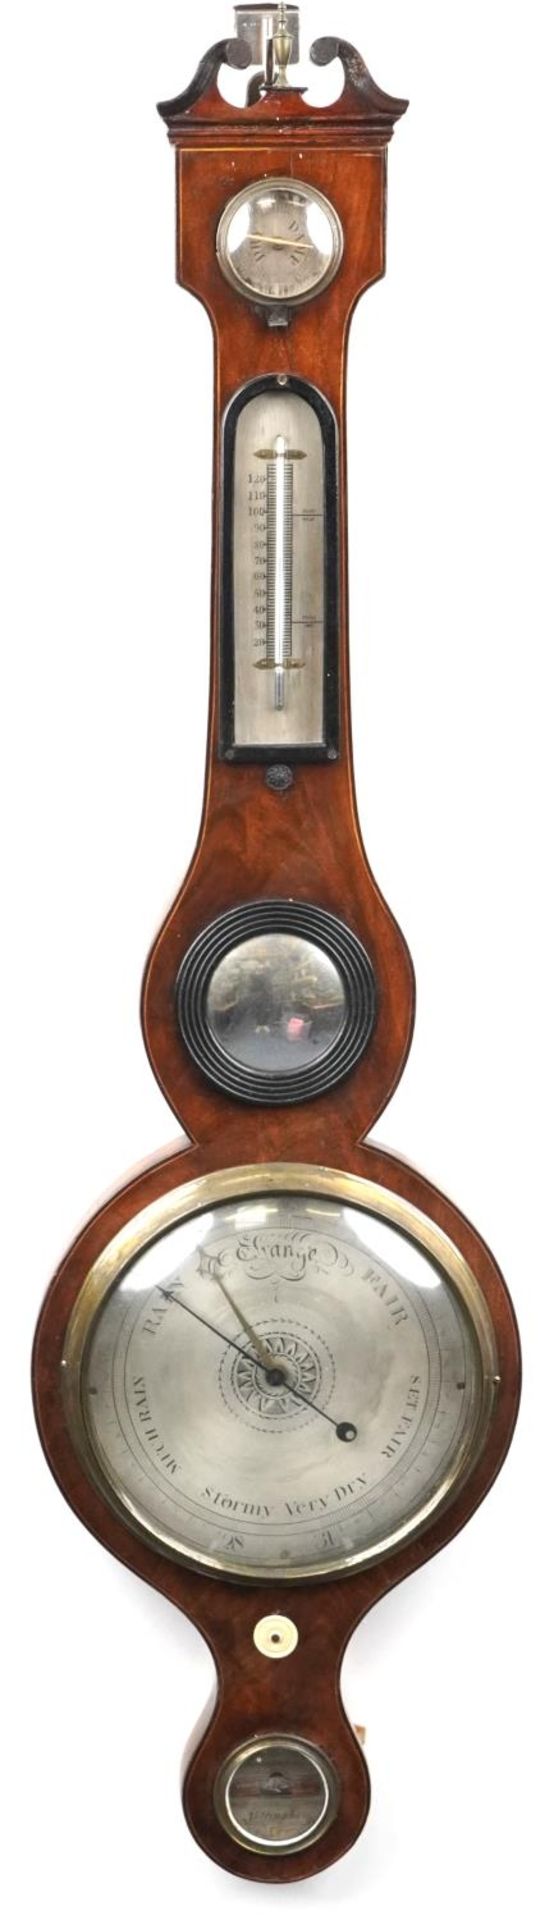 19th century inlaid mahogany banjo barometer and thermometer with silvered dials, one engraved